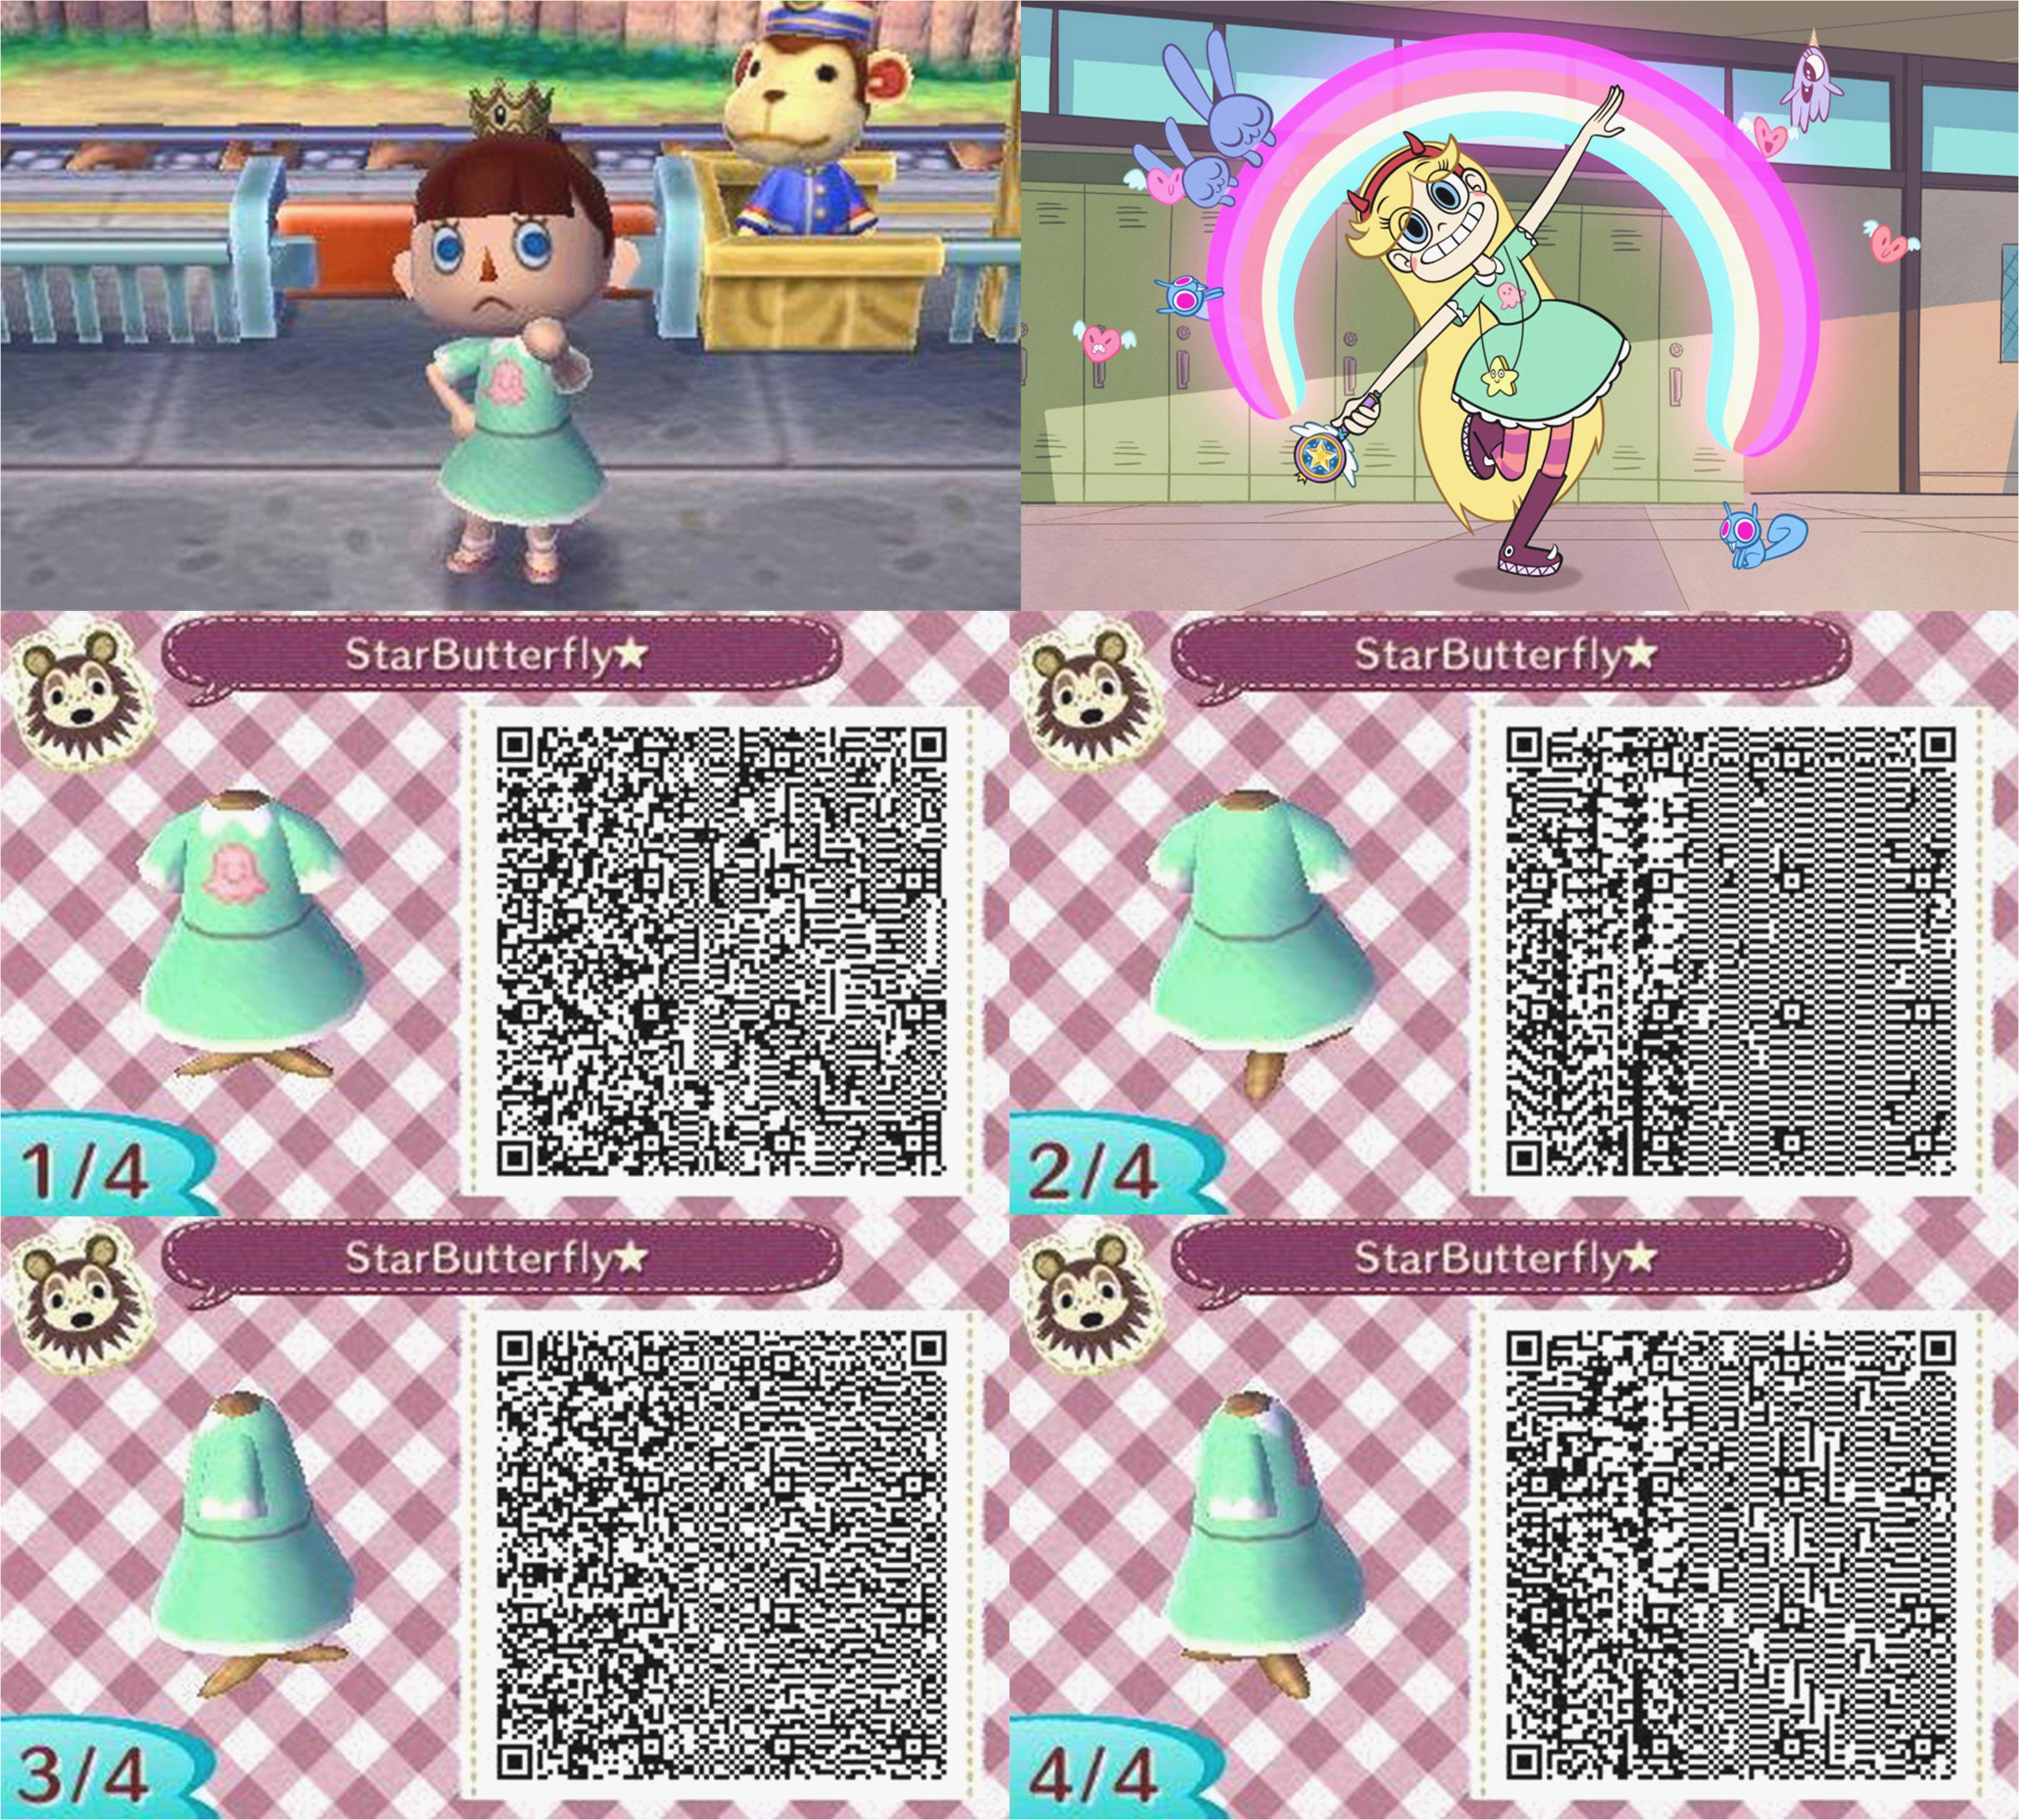 Star Butterfly Star vs the forces of evil Qr Code Design for Animal Crossing